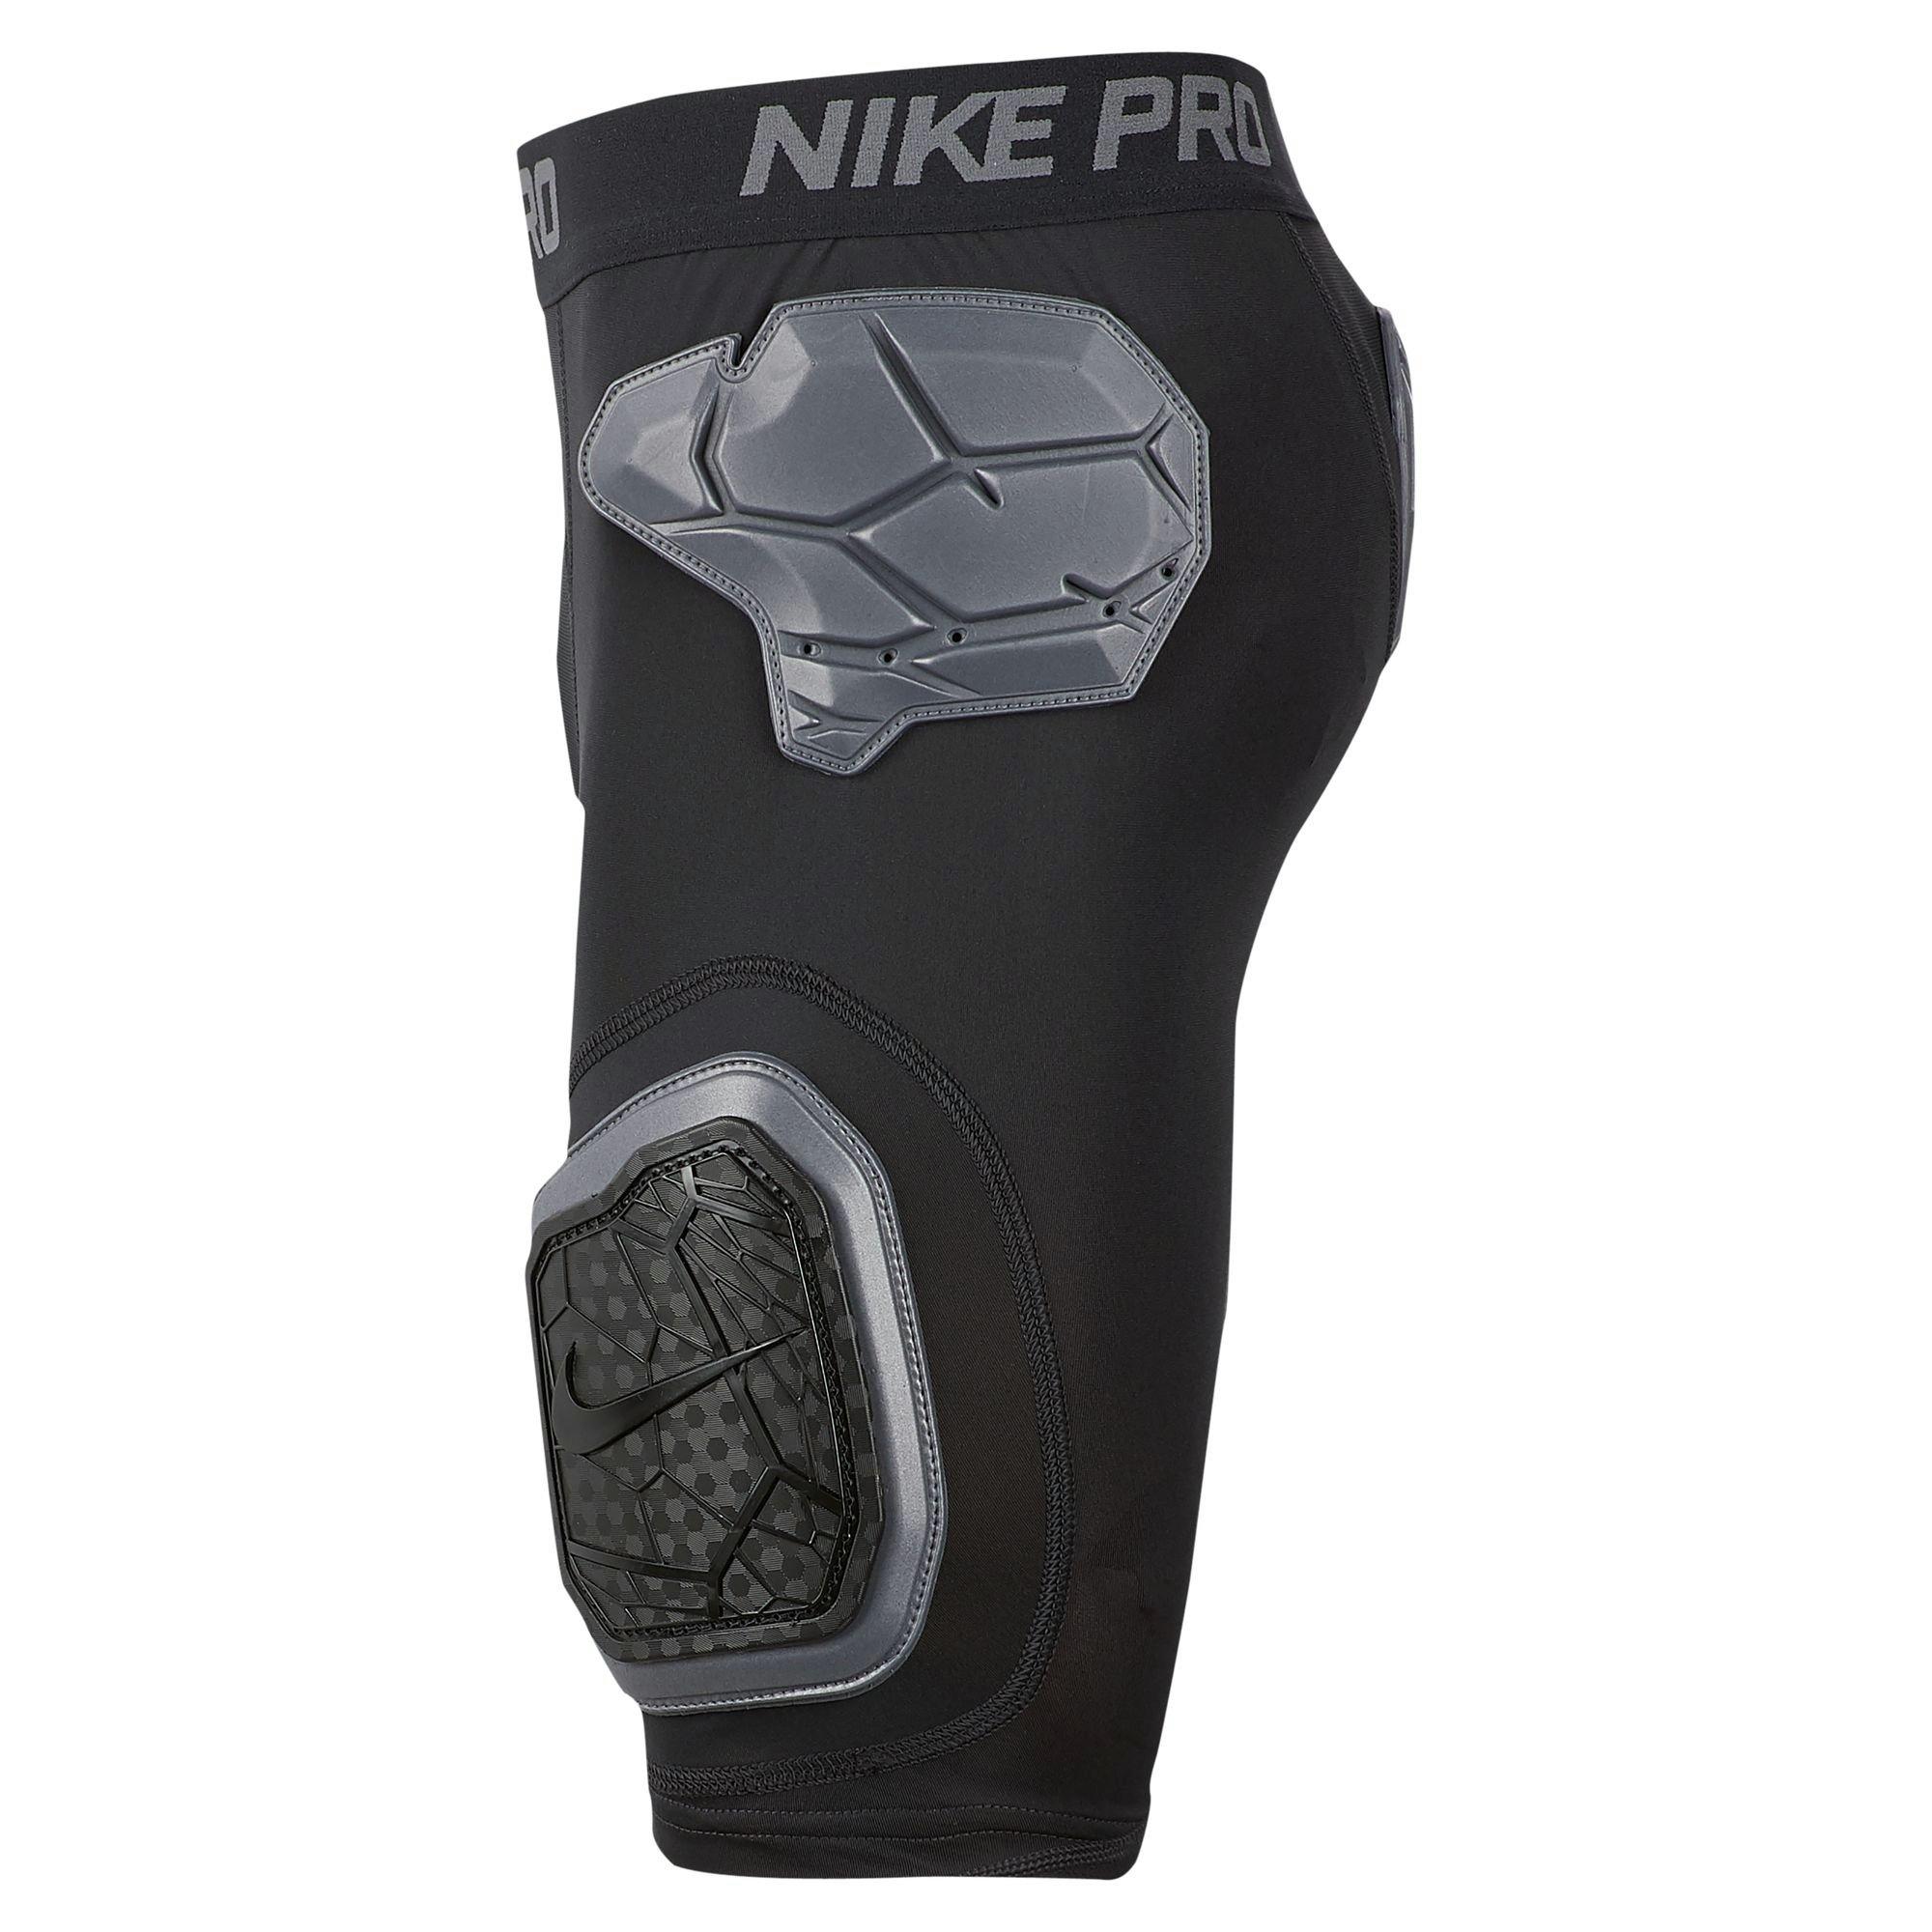 Men's PRO Dri-Fit Hyperstrong 3/4 Tight from Nike